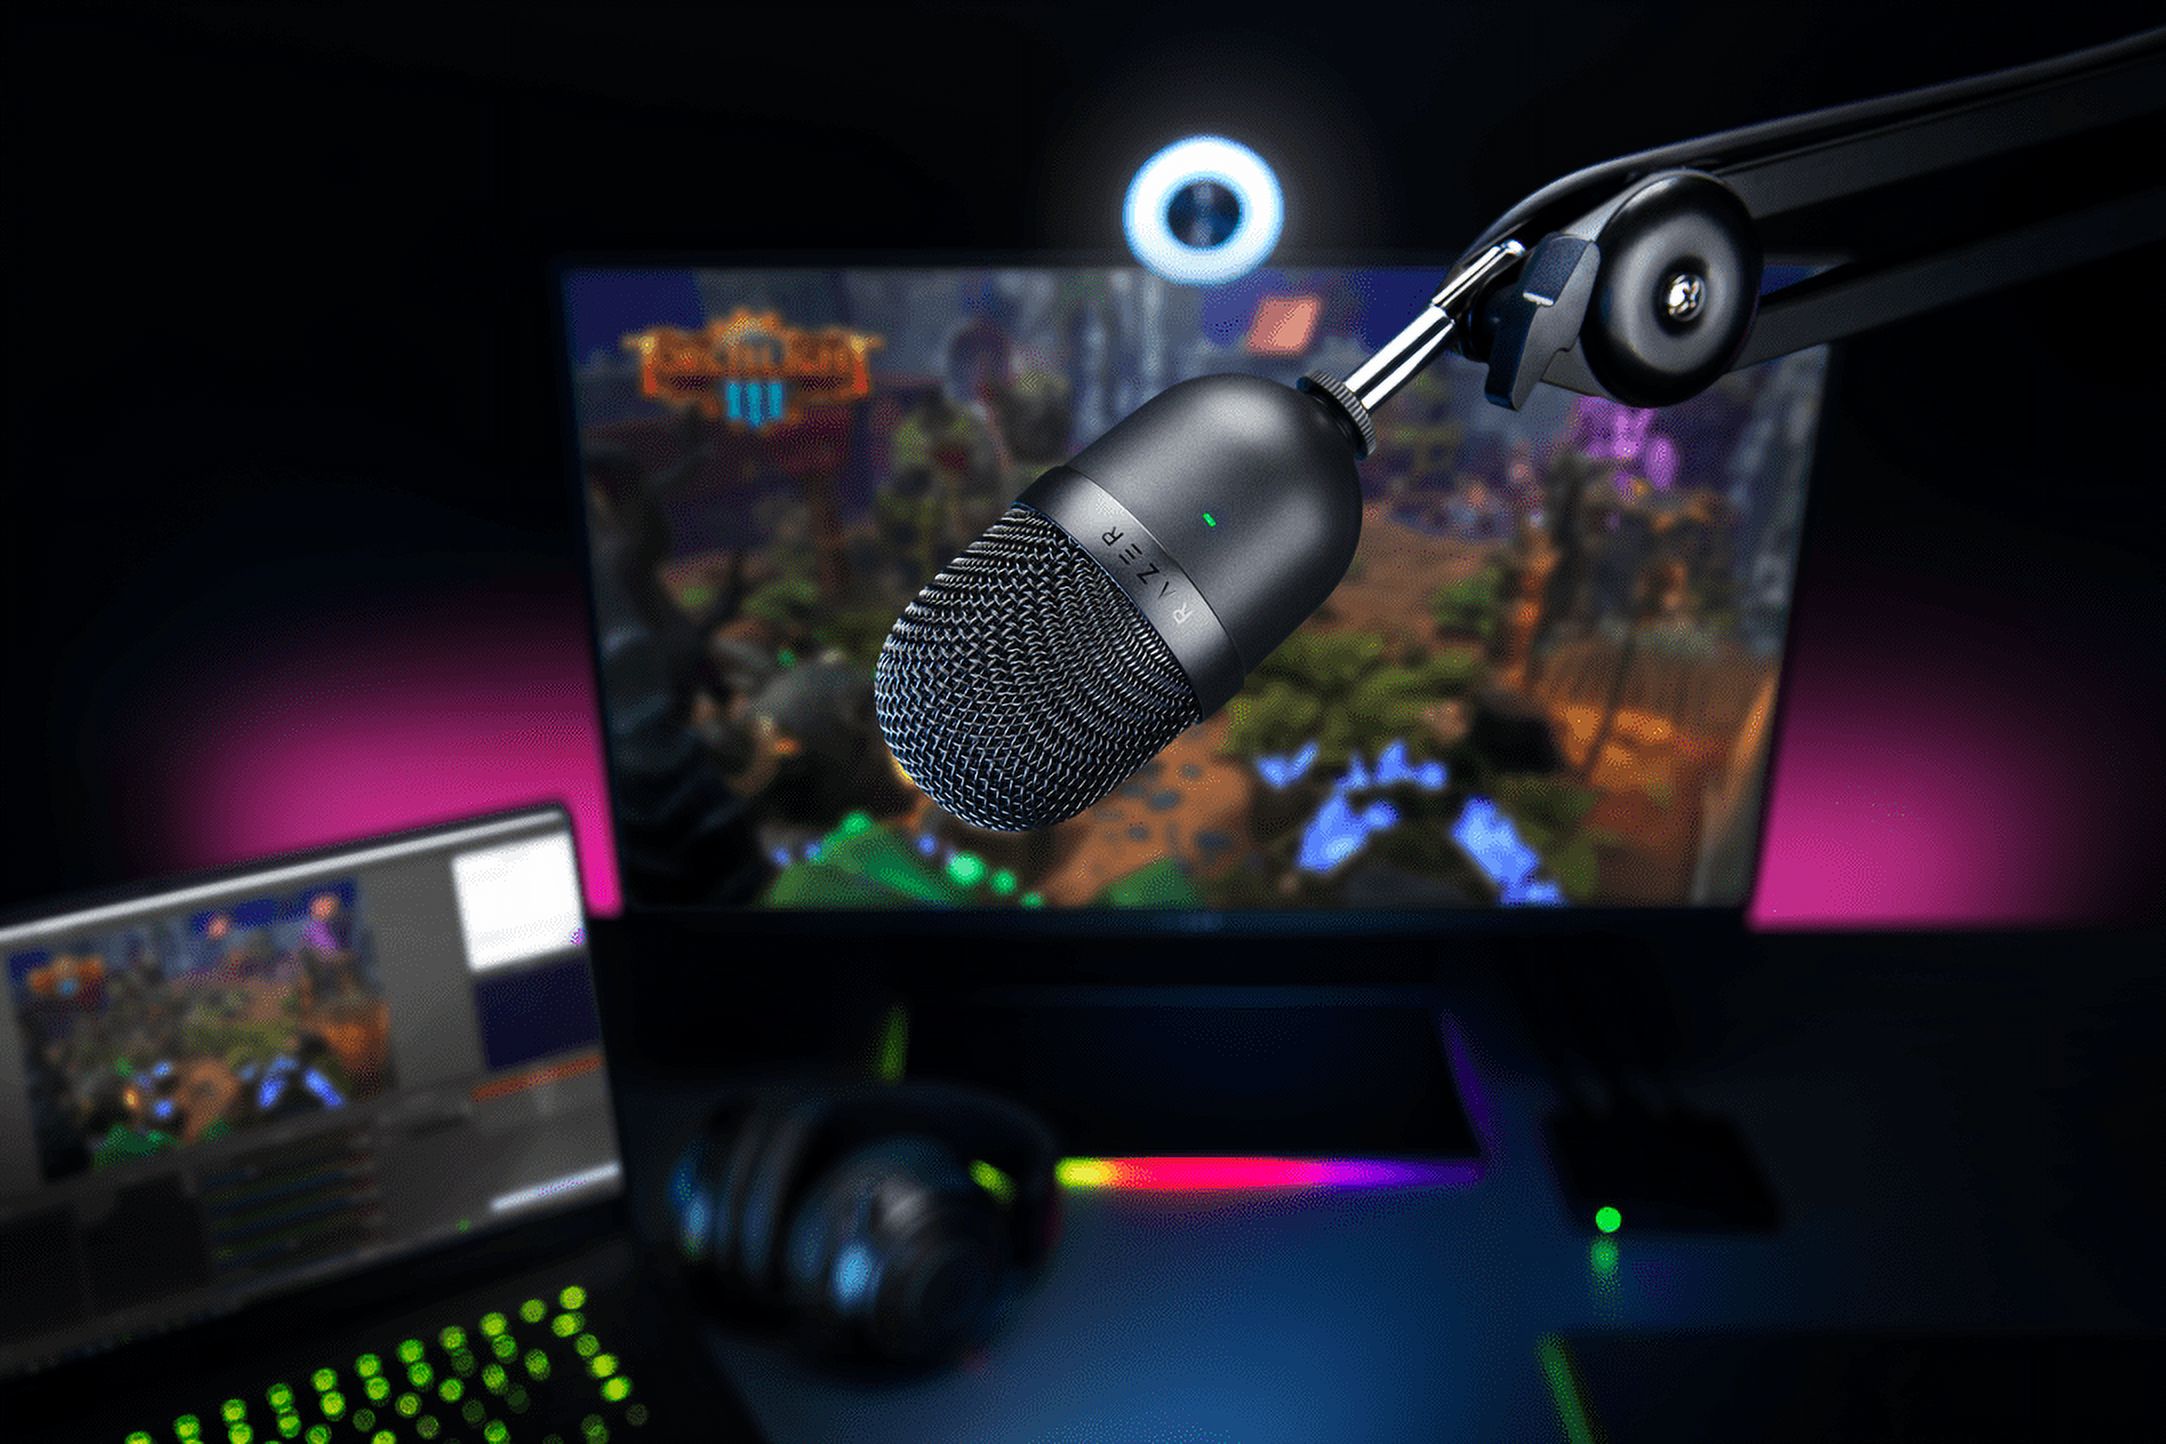 Razer Seiren Mini USB Ultra Compact Condenser Microphone for Streaming and Gaming on PC, Black - image 3 of 3